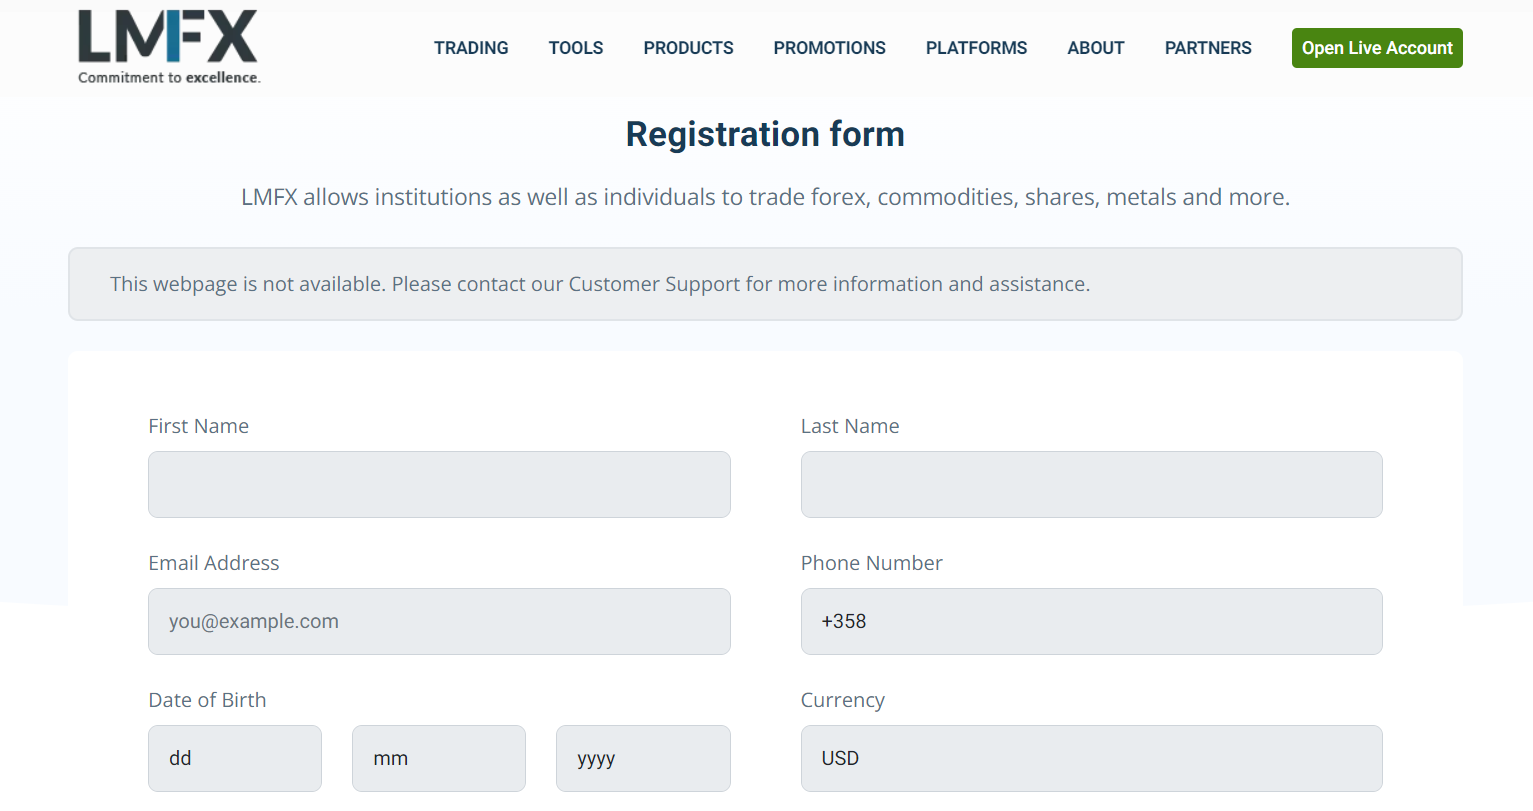 Overview of LMFX’s User Account — Registration